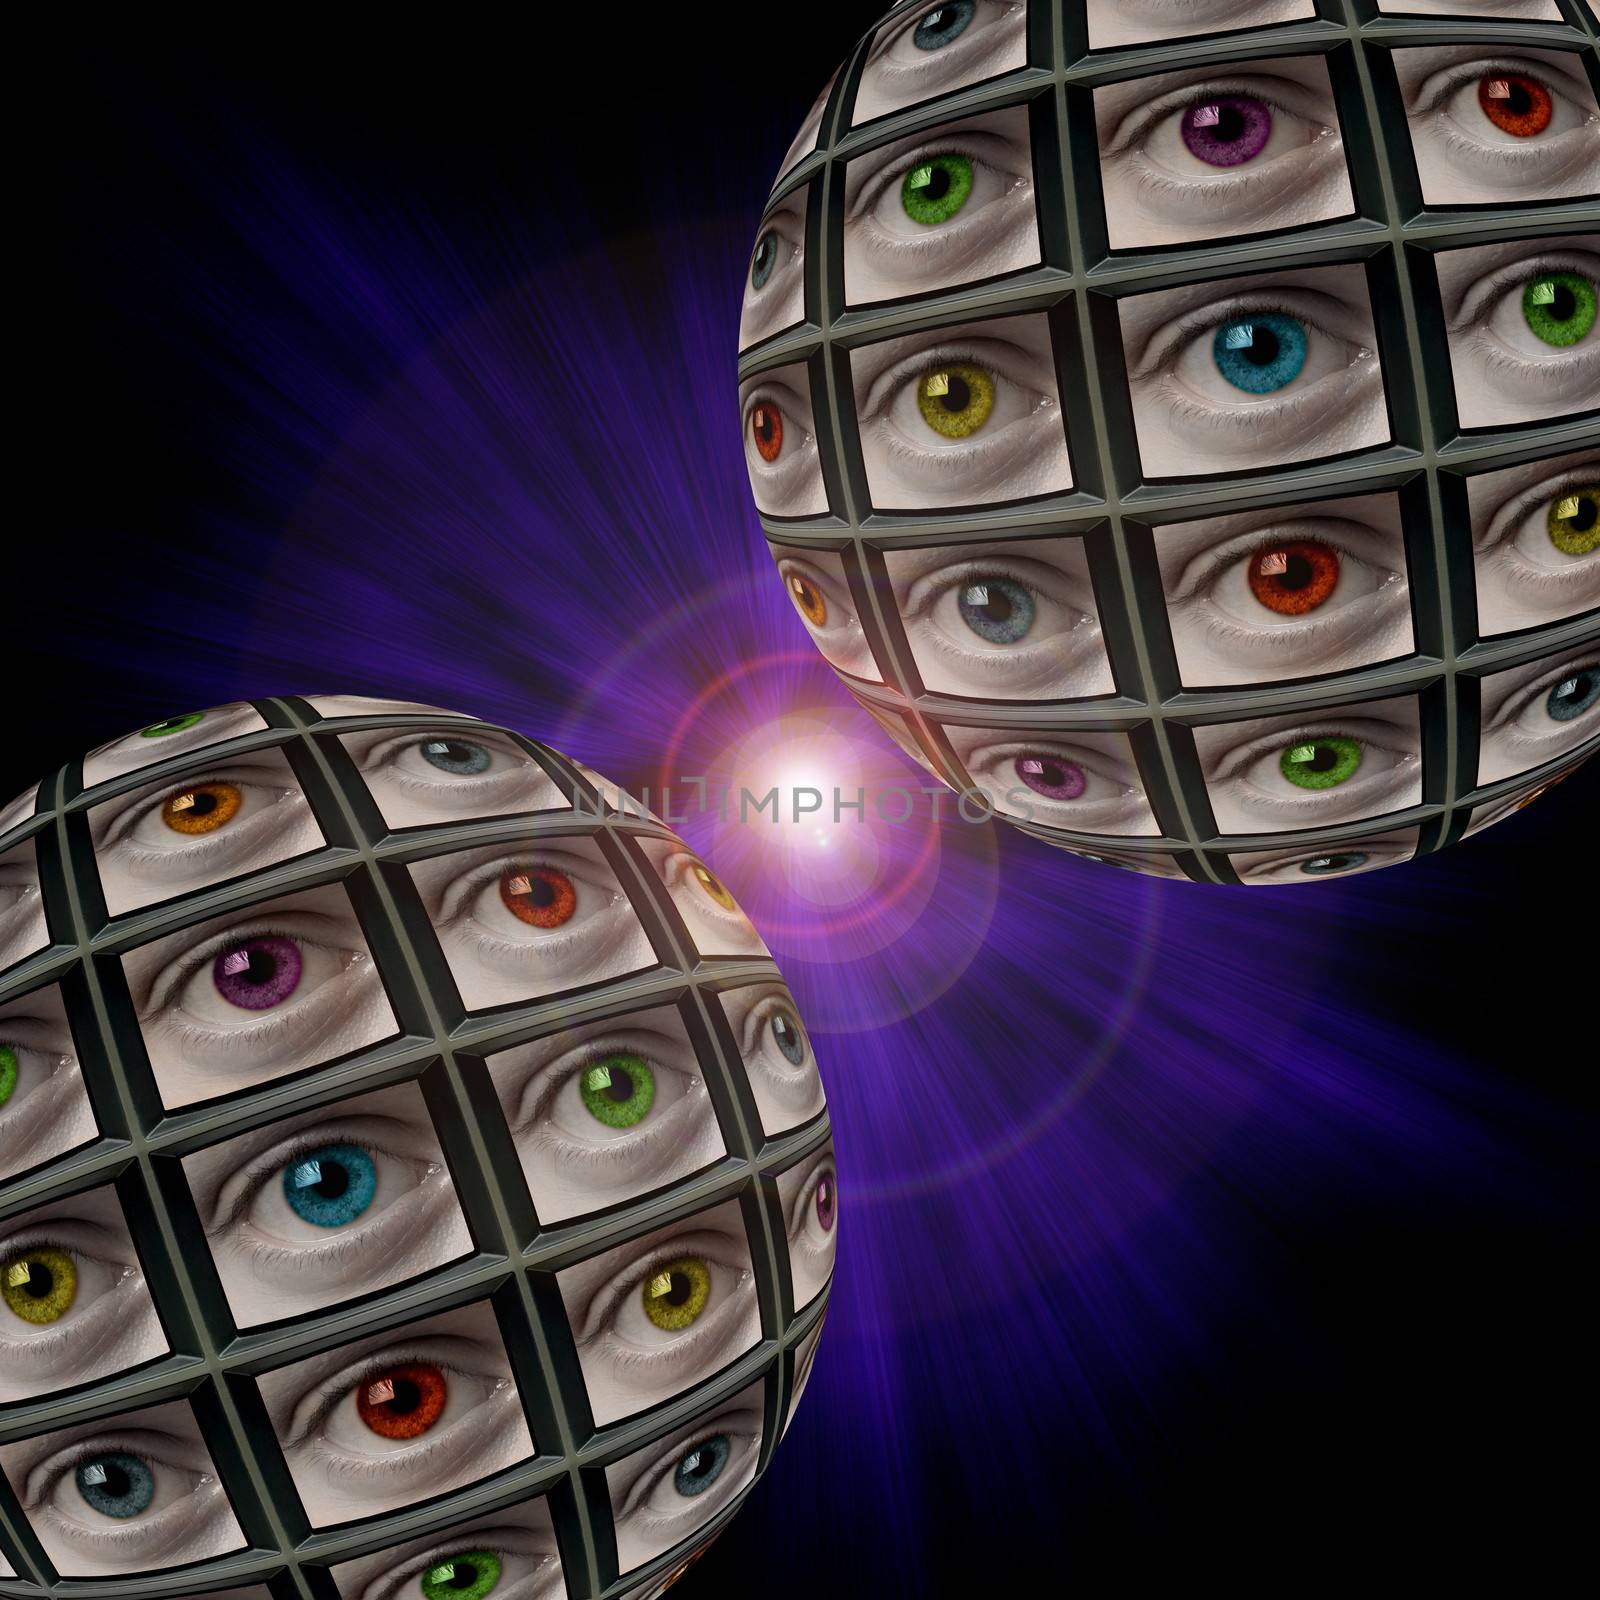 Two sphere of video screens showing multi-colored eyes, in a bluish vortex with lens flare